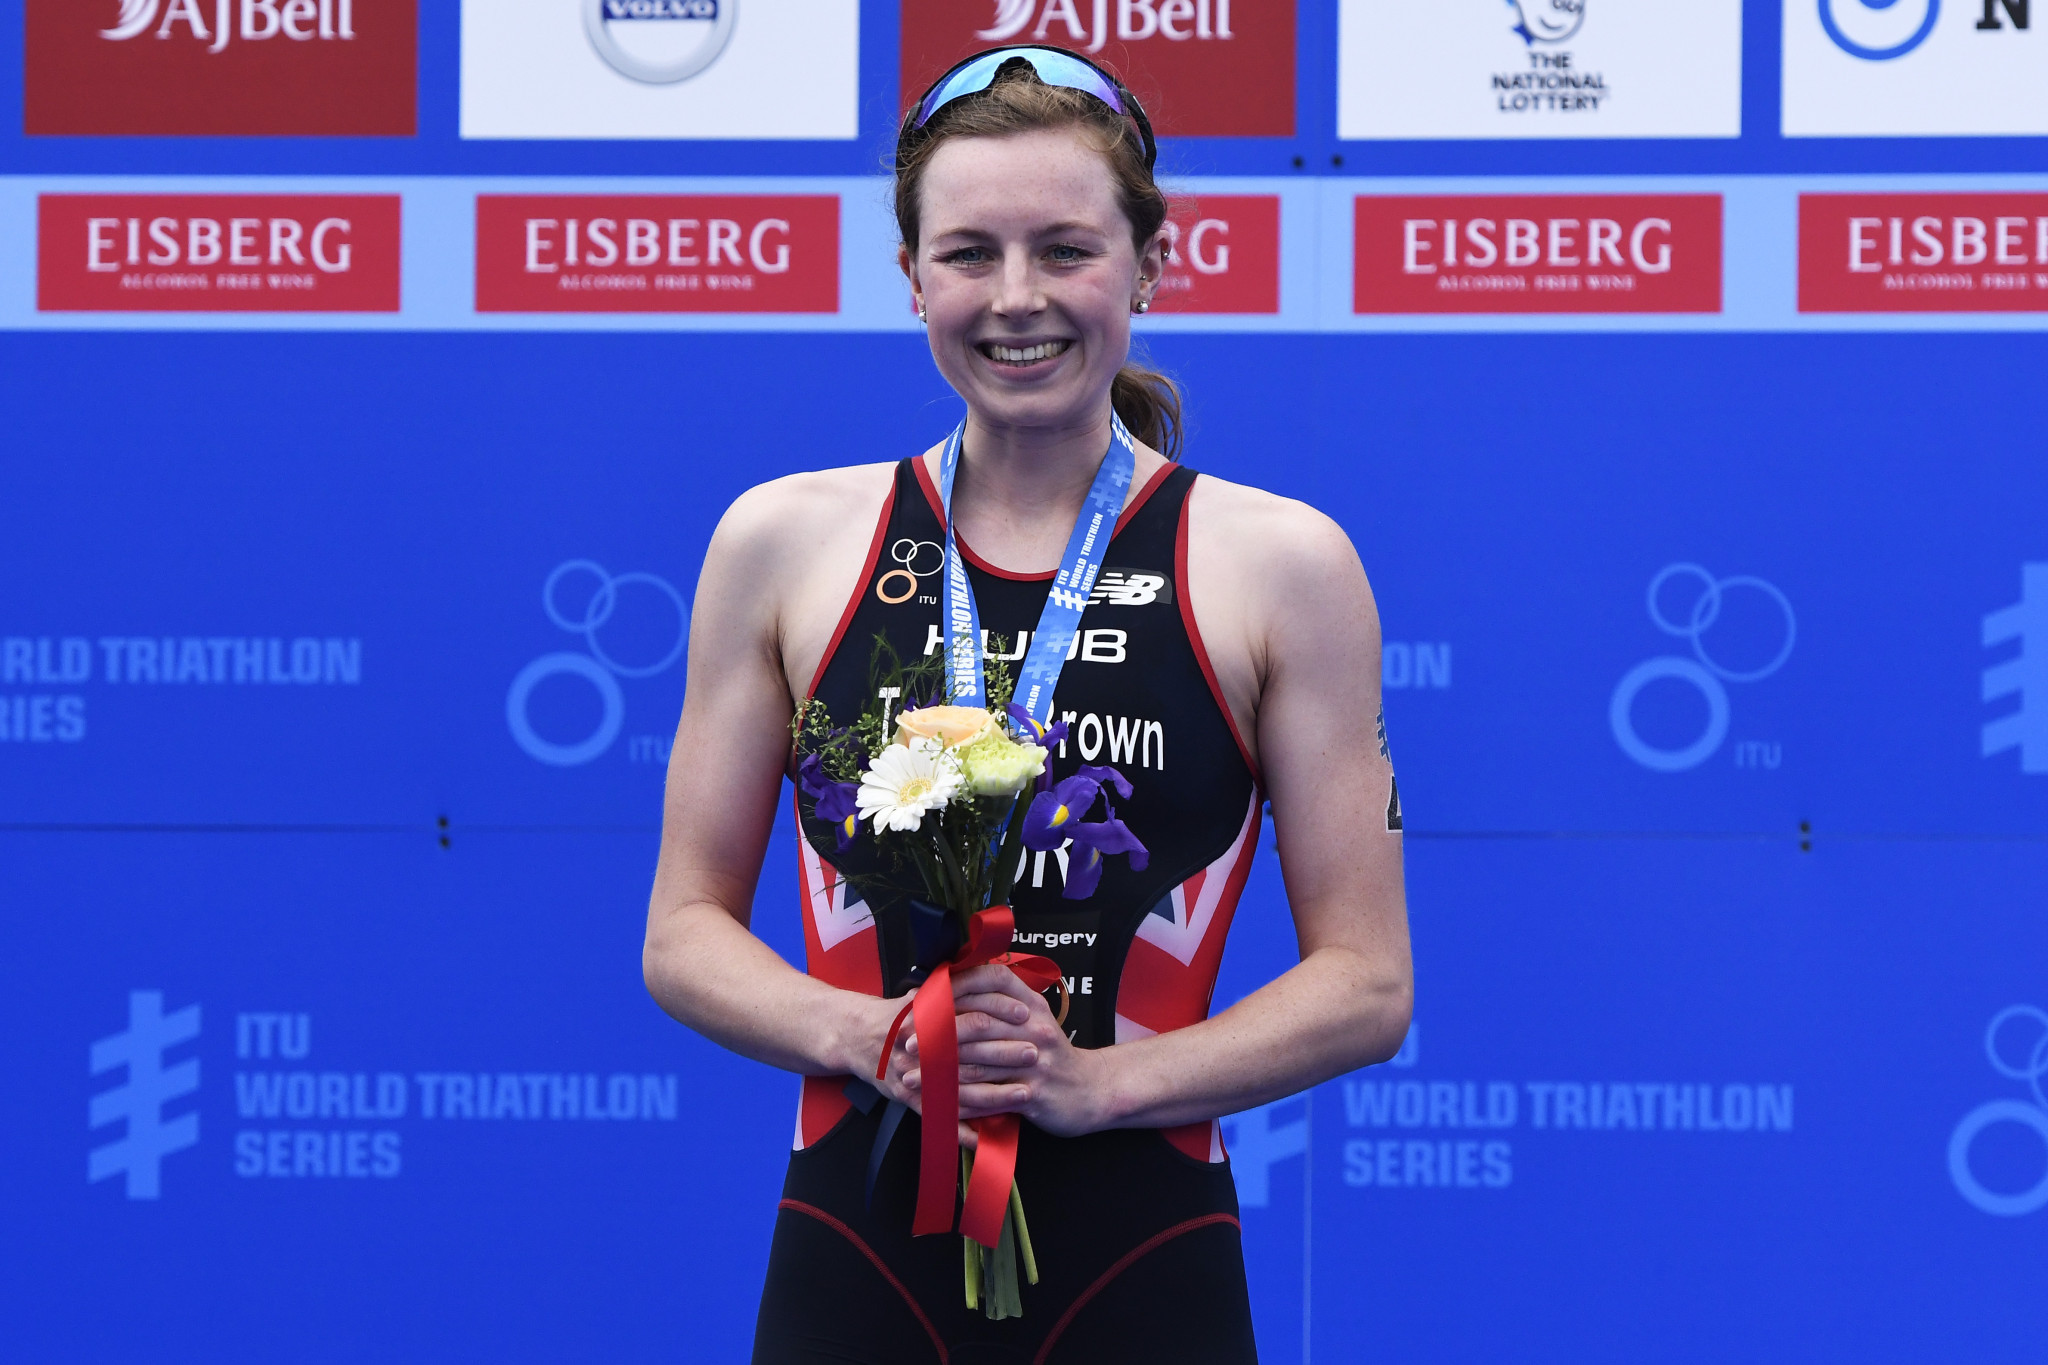 Newly crowned world champion Georgia Taylor-Brown is set to make her Olympic debut next year ©Getty Images